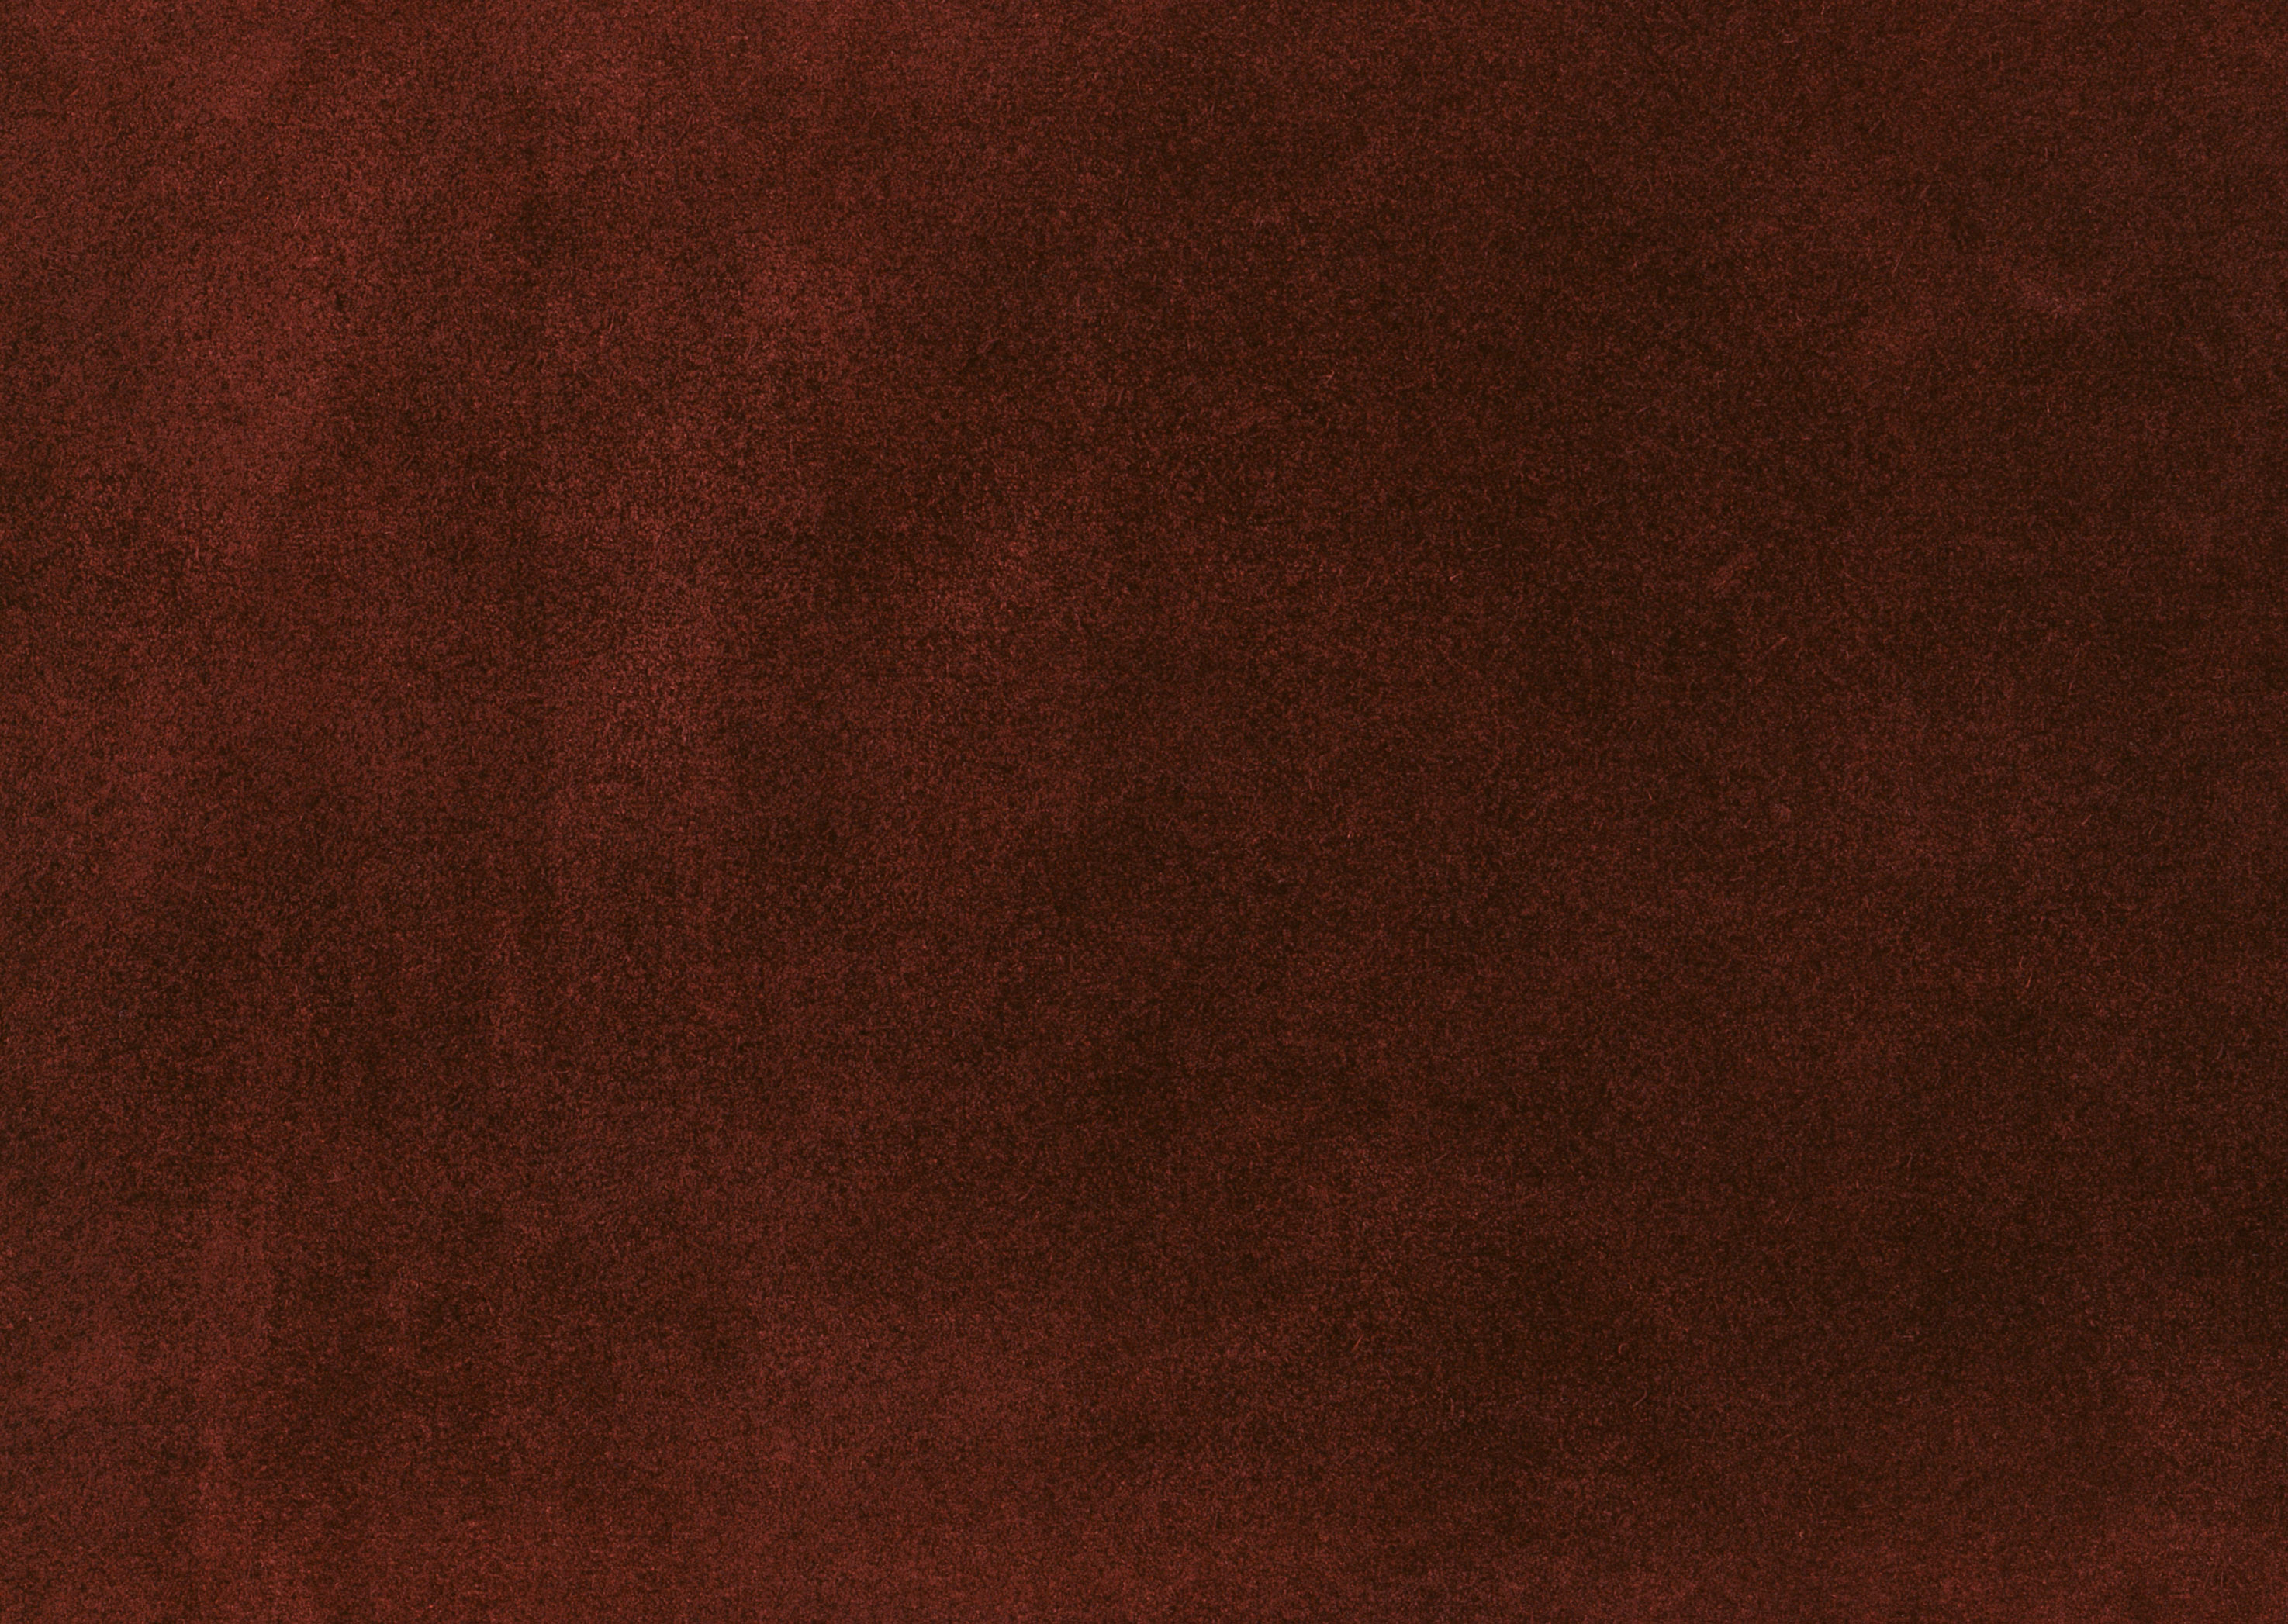 Brown leather texture background image